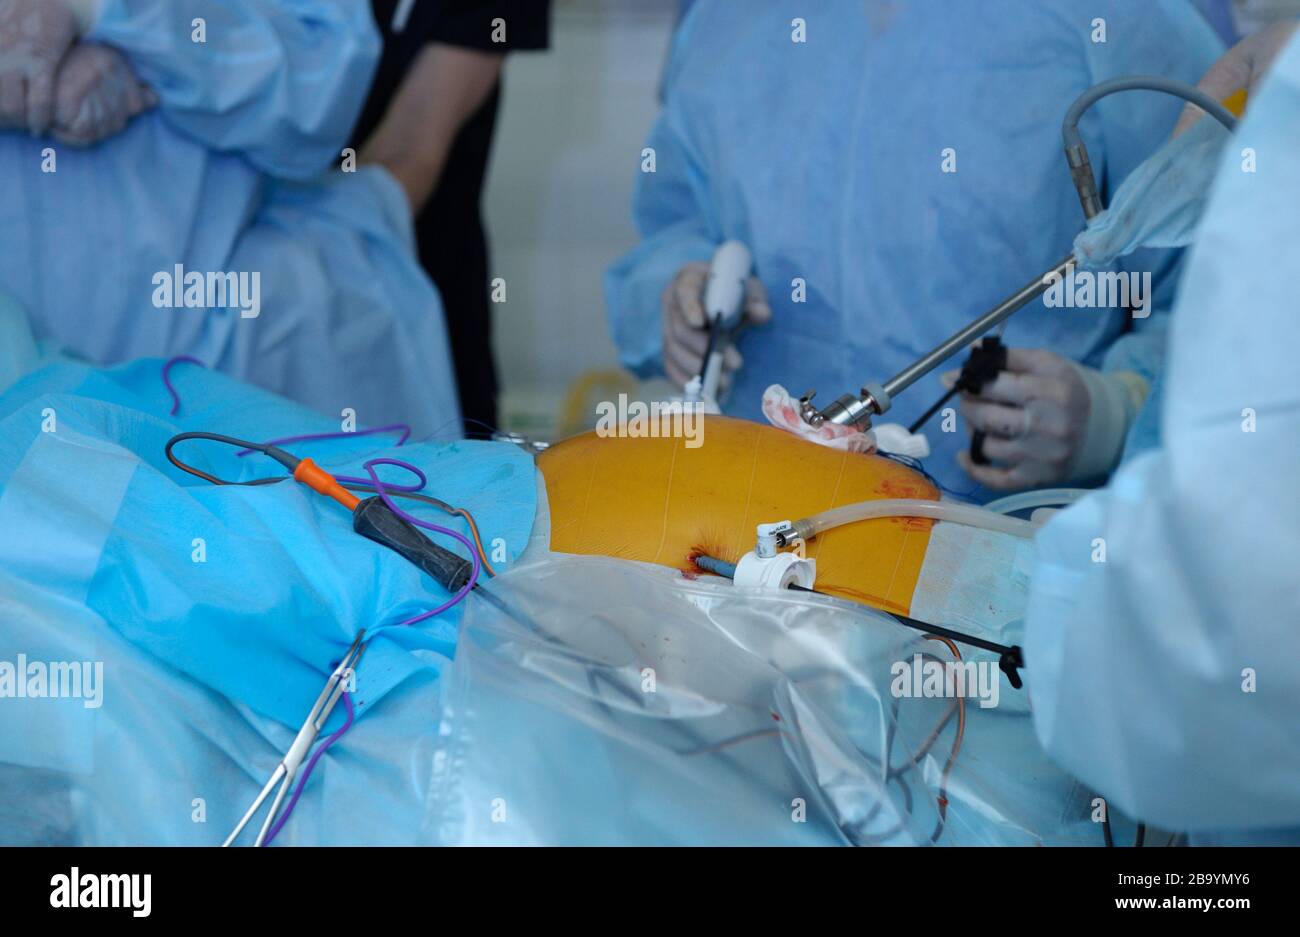 Laparoscopy surgery. Surgeon hand holding laparoscopic instrument attached to a patient belly. Stock Photo